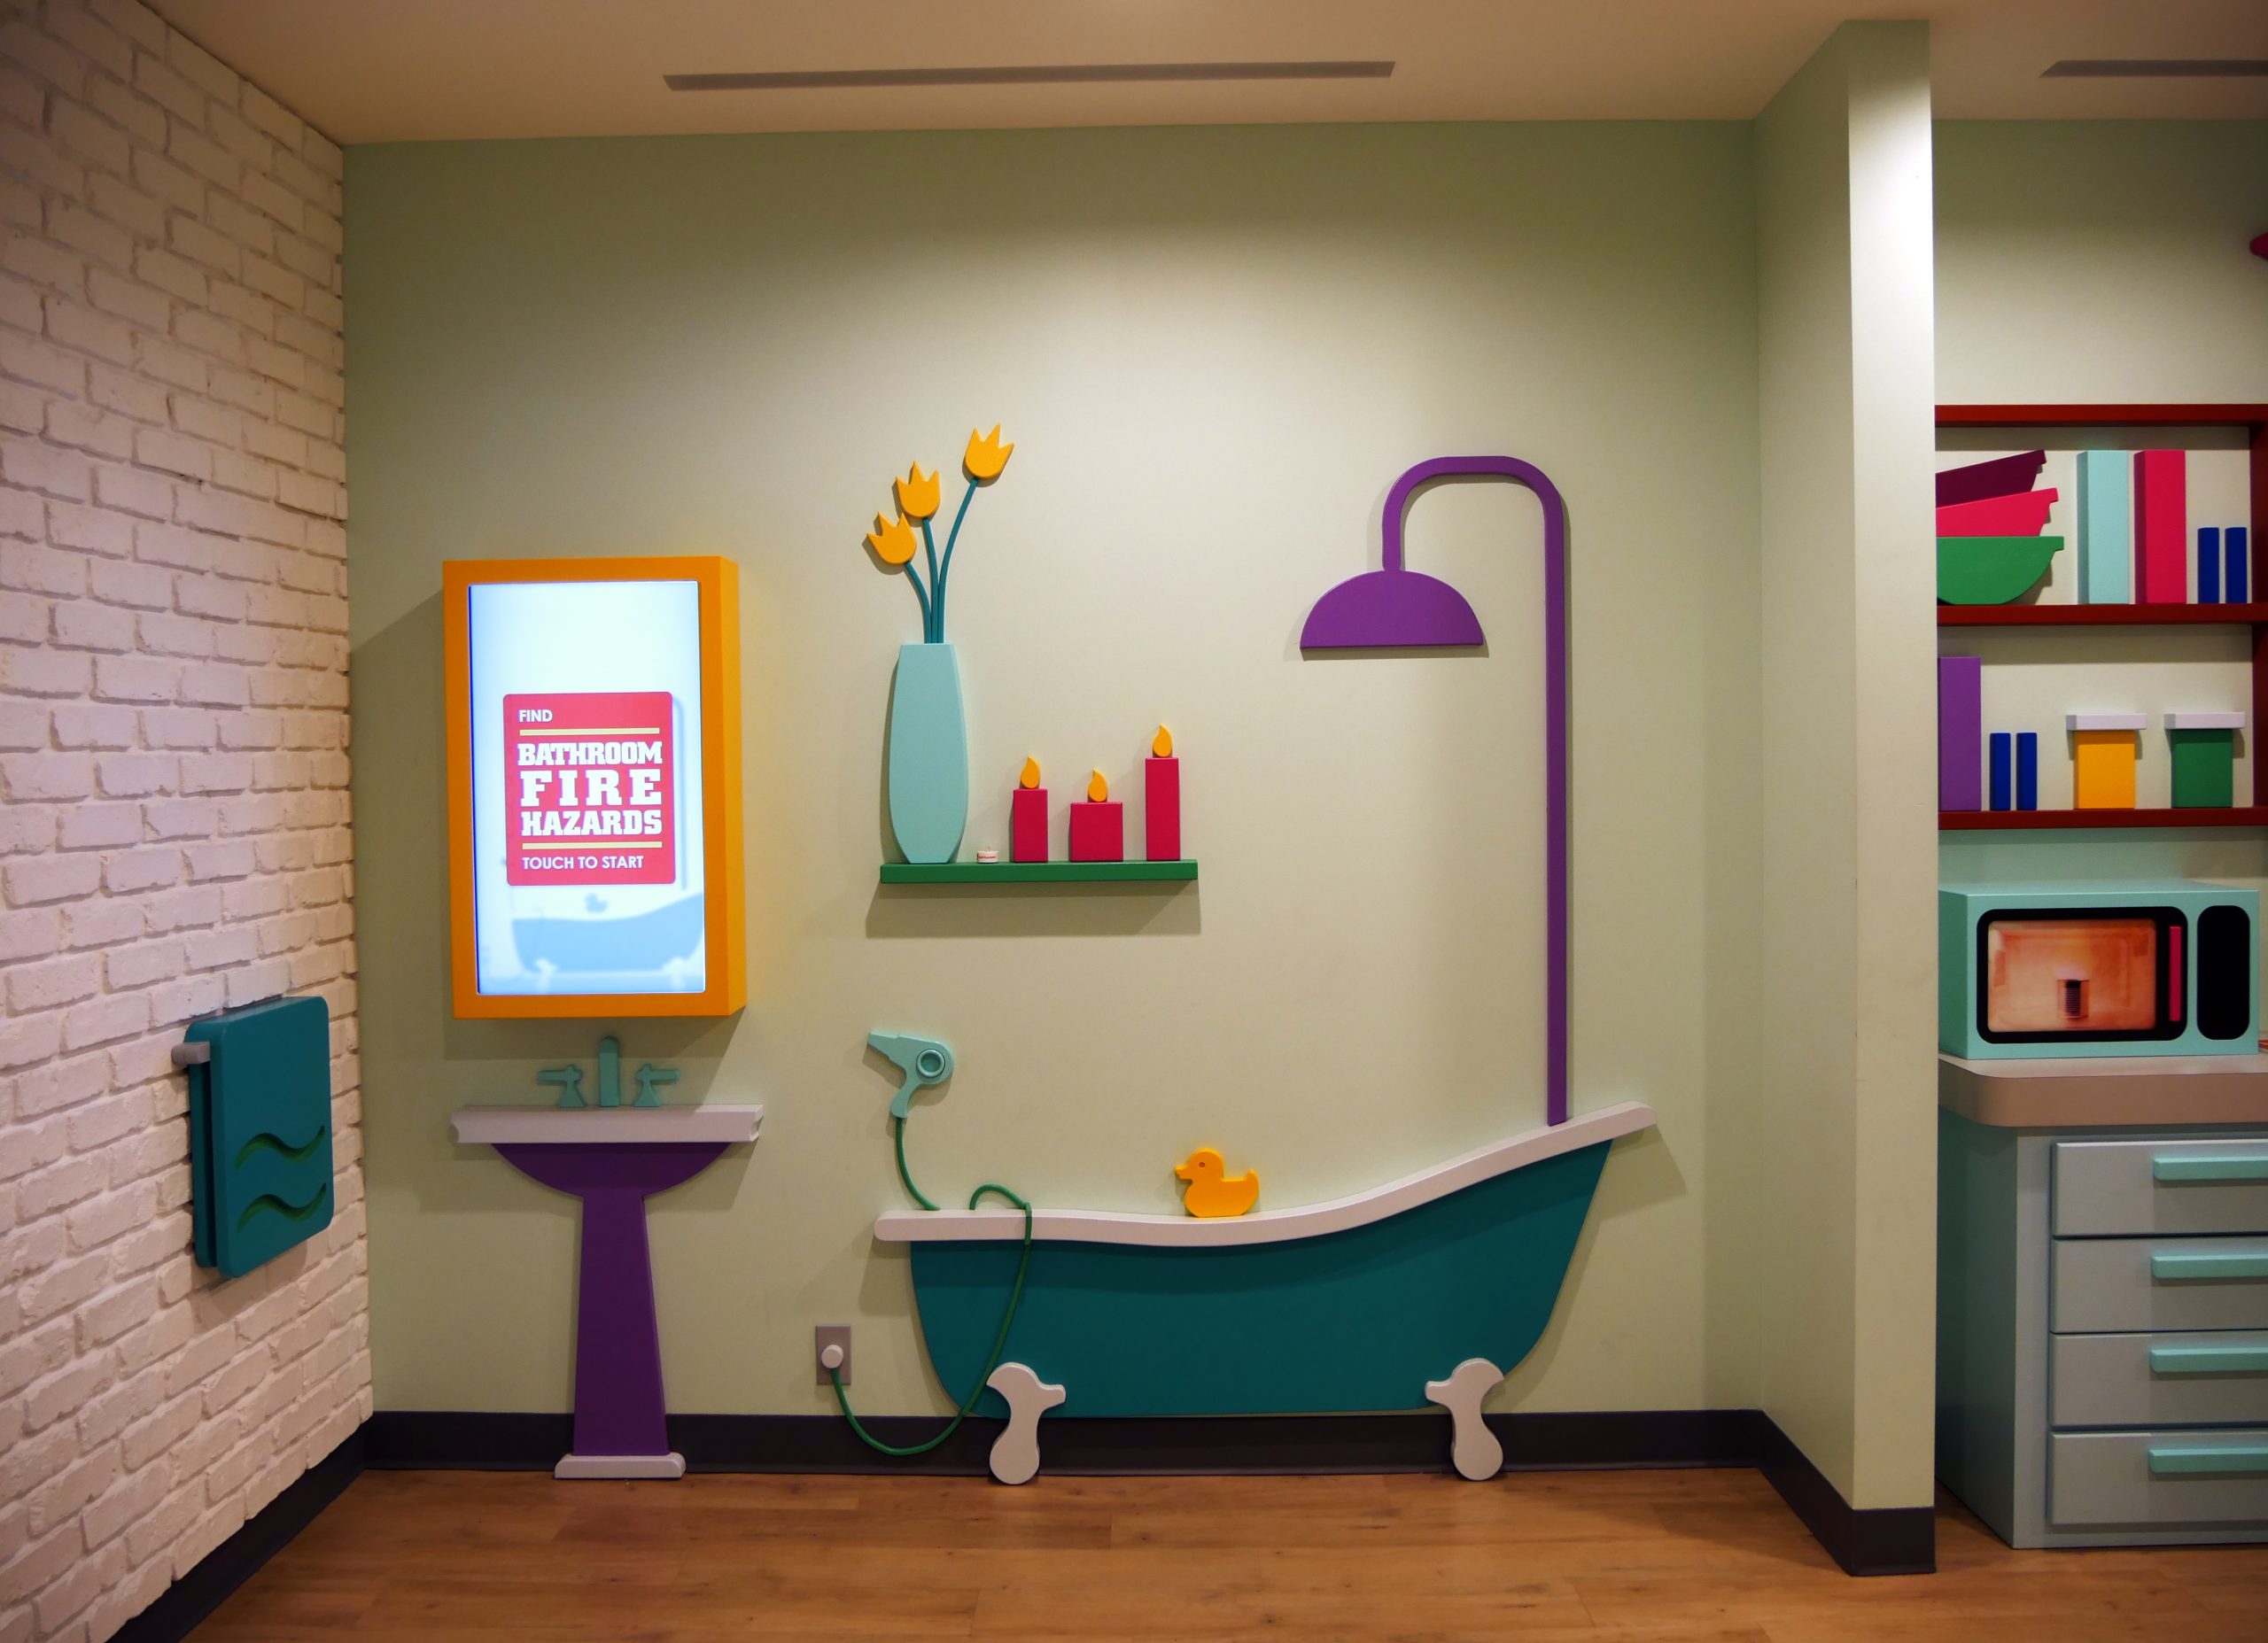 Interactive Area featuring bathroom set up with touch screen display above the sink